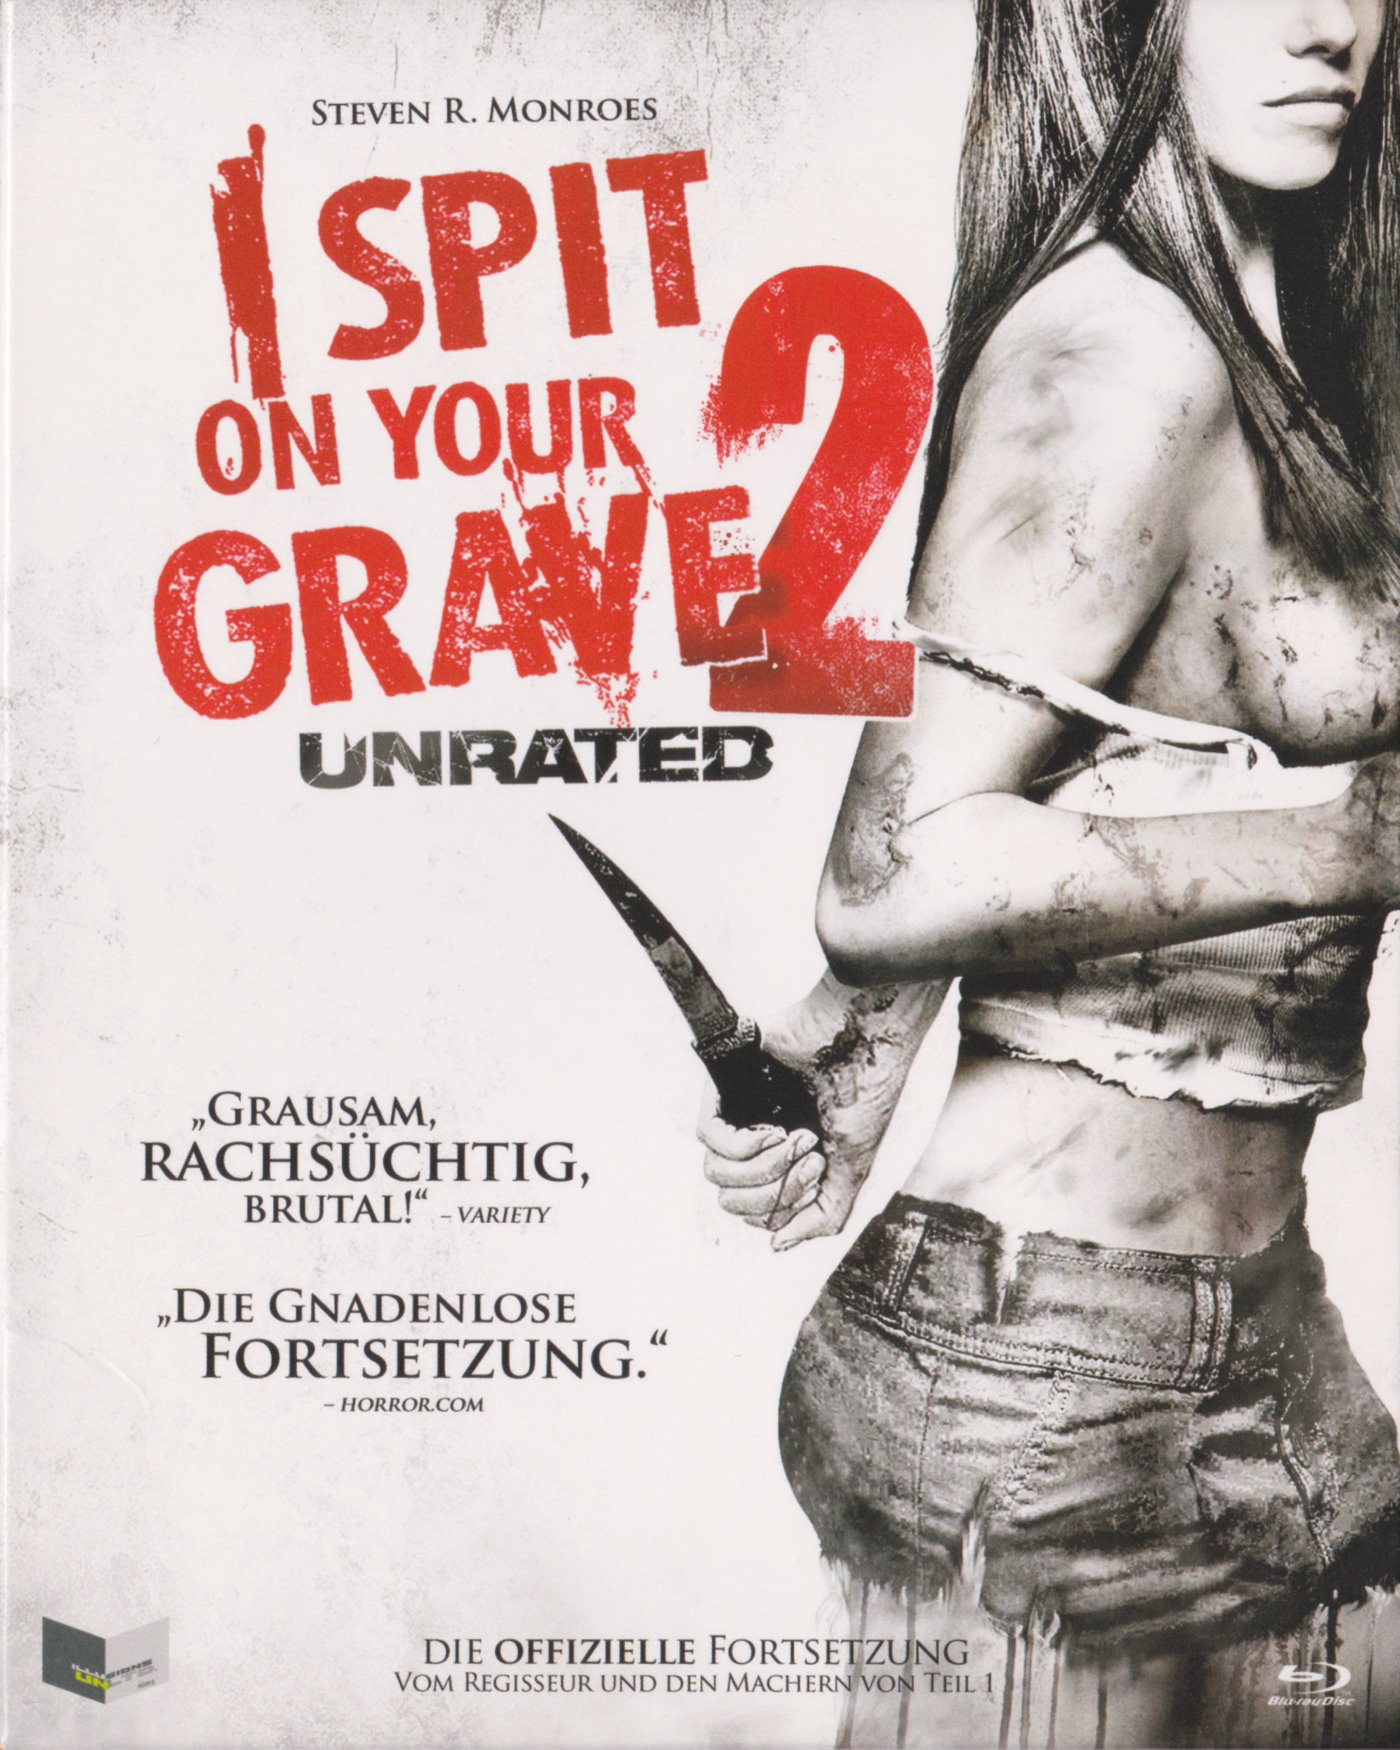 Cover - I Spit on Your Grave 2.jpg